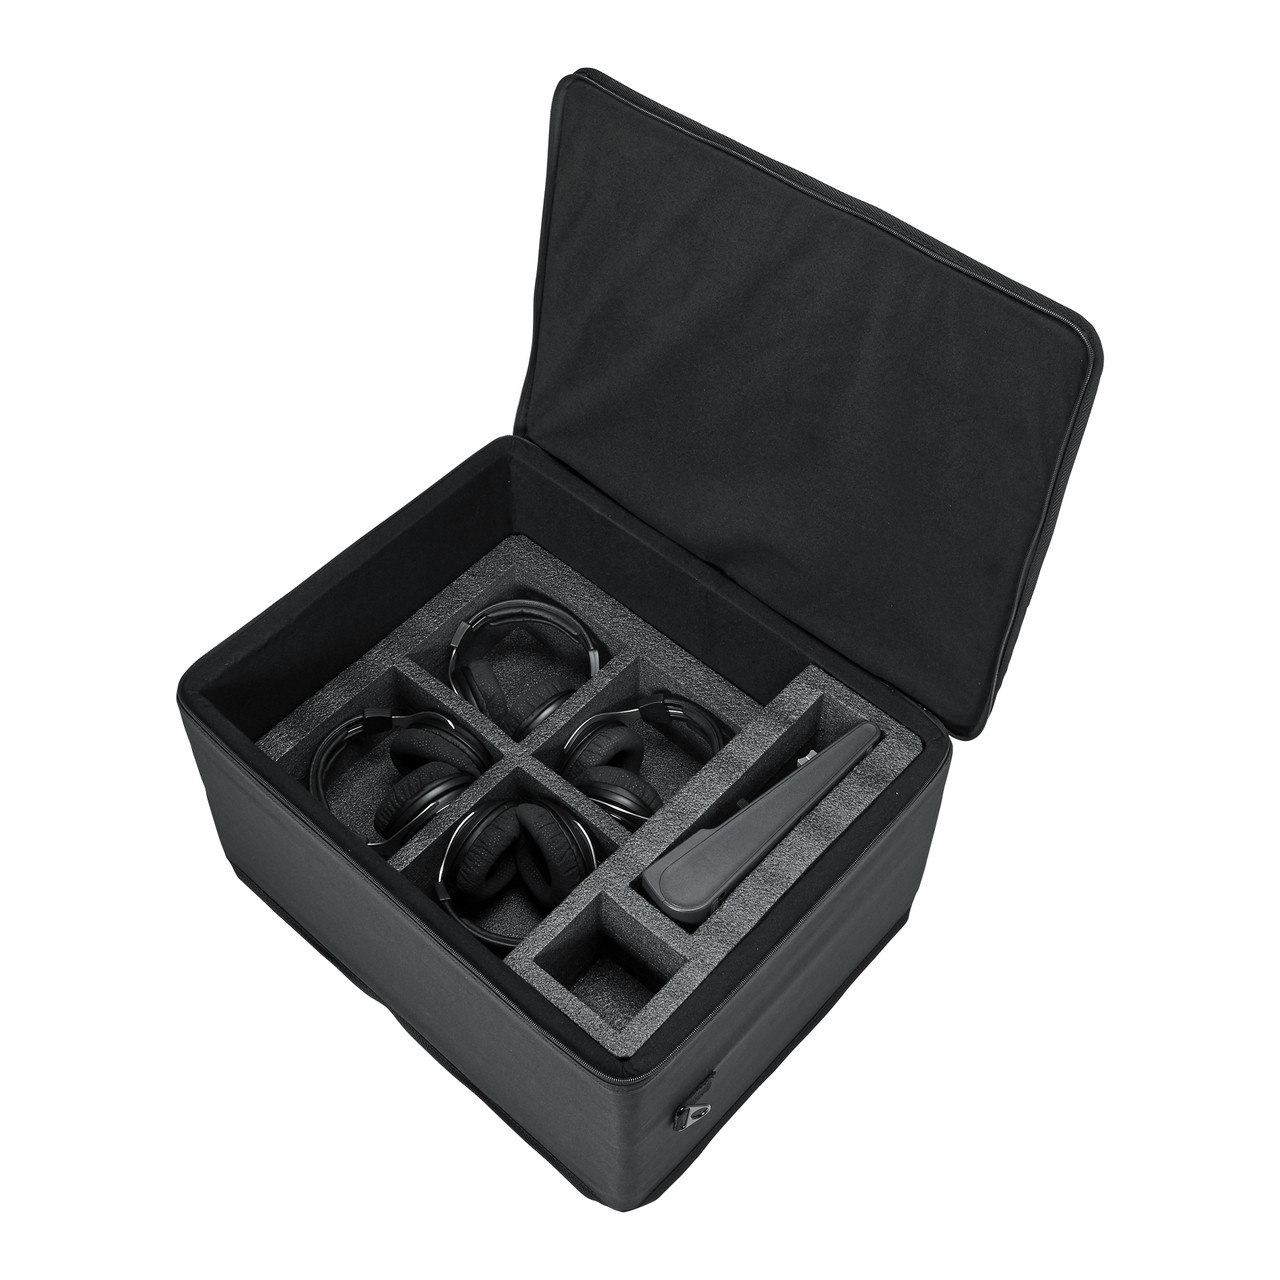 Gator GL-ZOOML8-4 Lightweight Case For Zoom L8 & Four Mics